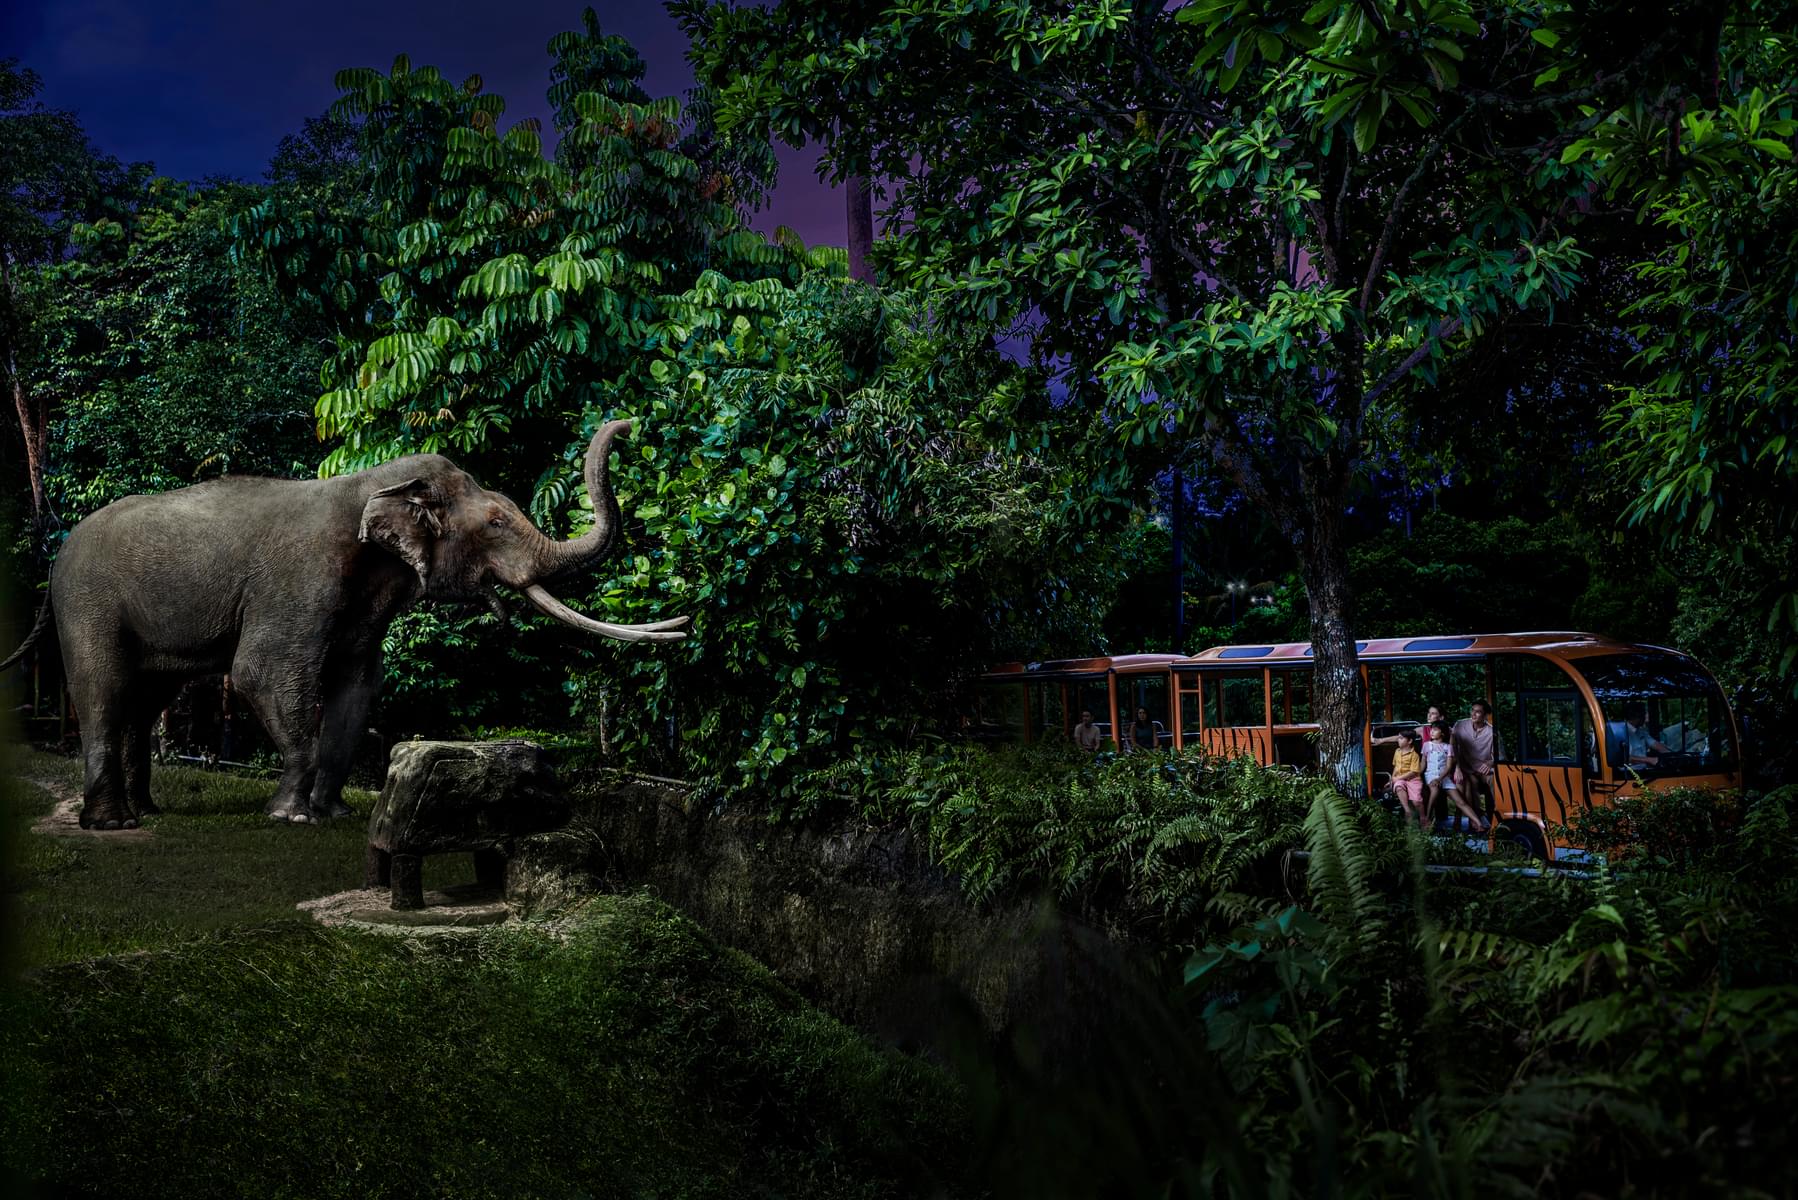 Have a memorable night at the Singapore Night Safari watching nocturnal creatures under the moonlit canopy